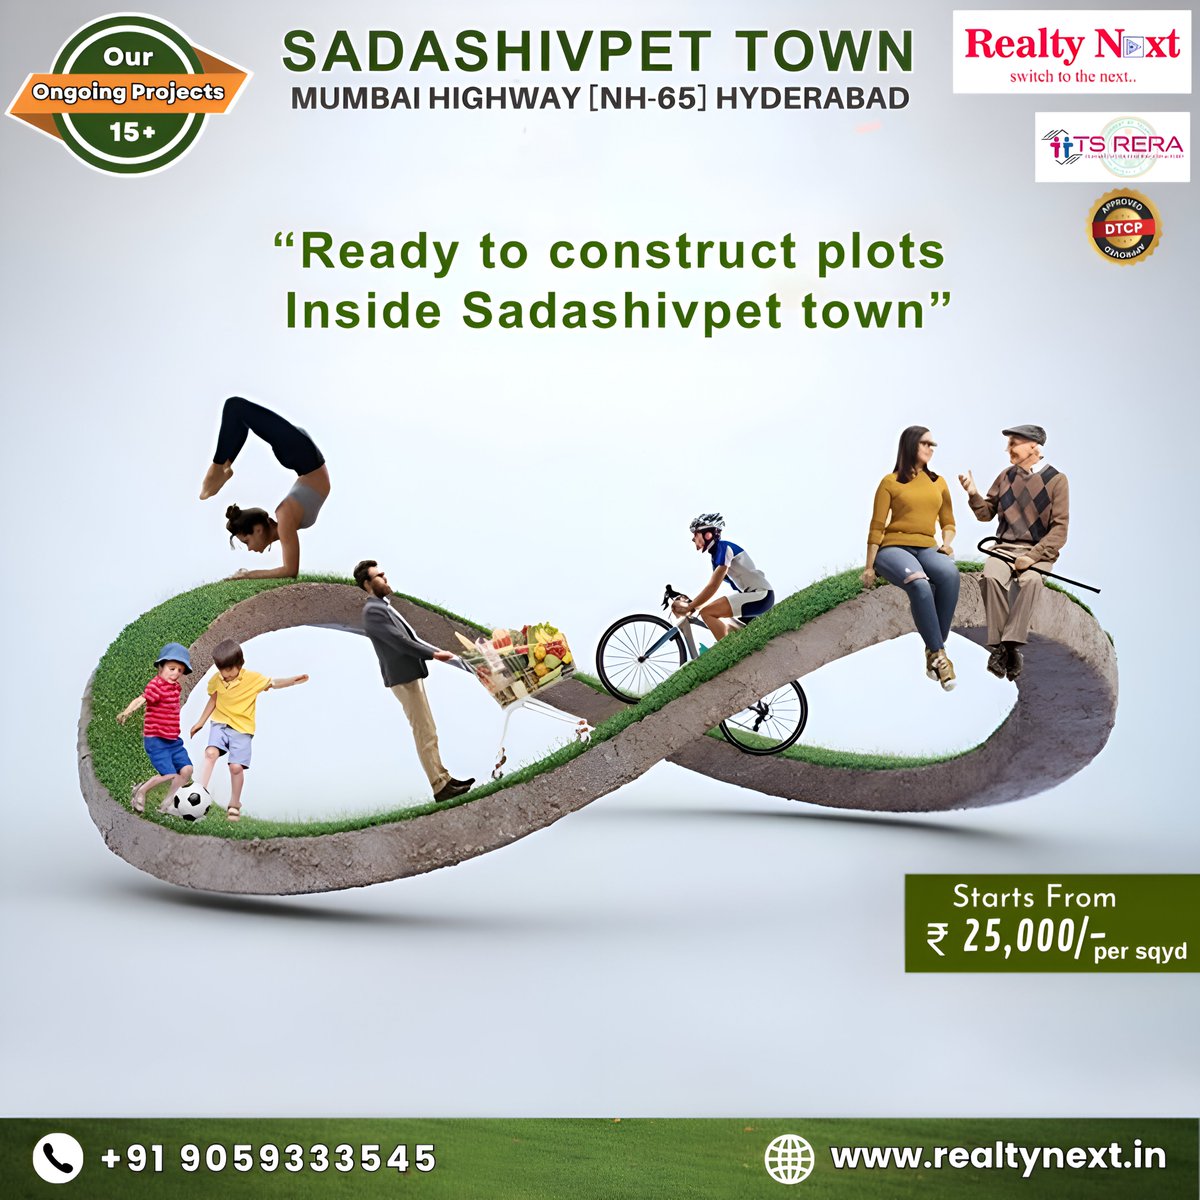 Open Plots For sale at Sadashivpet Town near Mumbai Highway, Hyderabad starting from ₹25,000 per sqyd.

Phone:9059333545
#realtynext #RealEstate #Hyderabad #residential #investment #property #Trending #Landsat #RERA #Telangana #investing  #forsale #realestateforsale #openplots